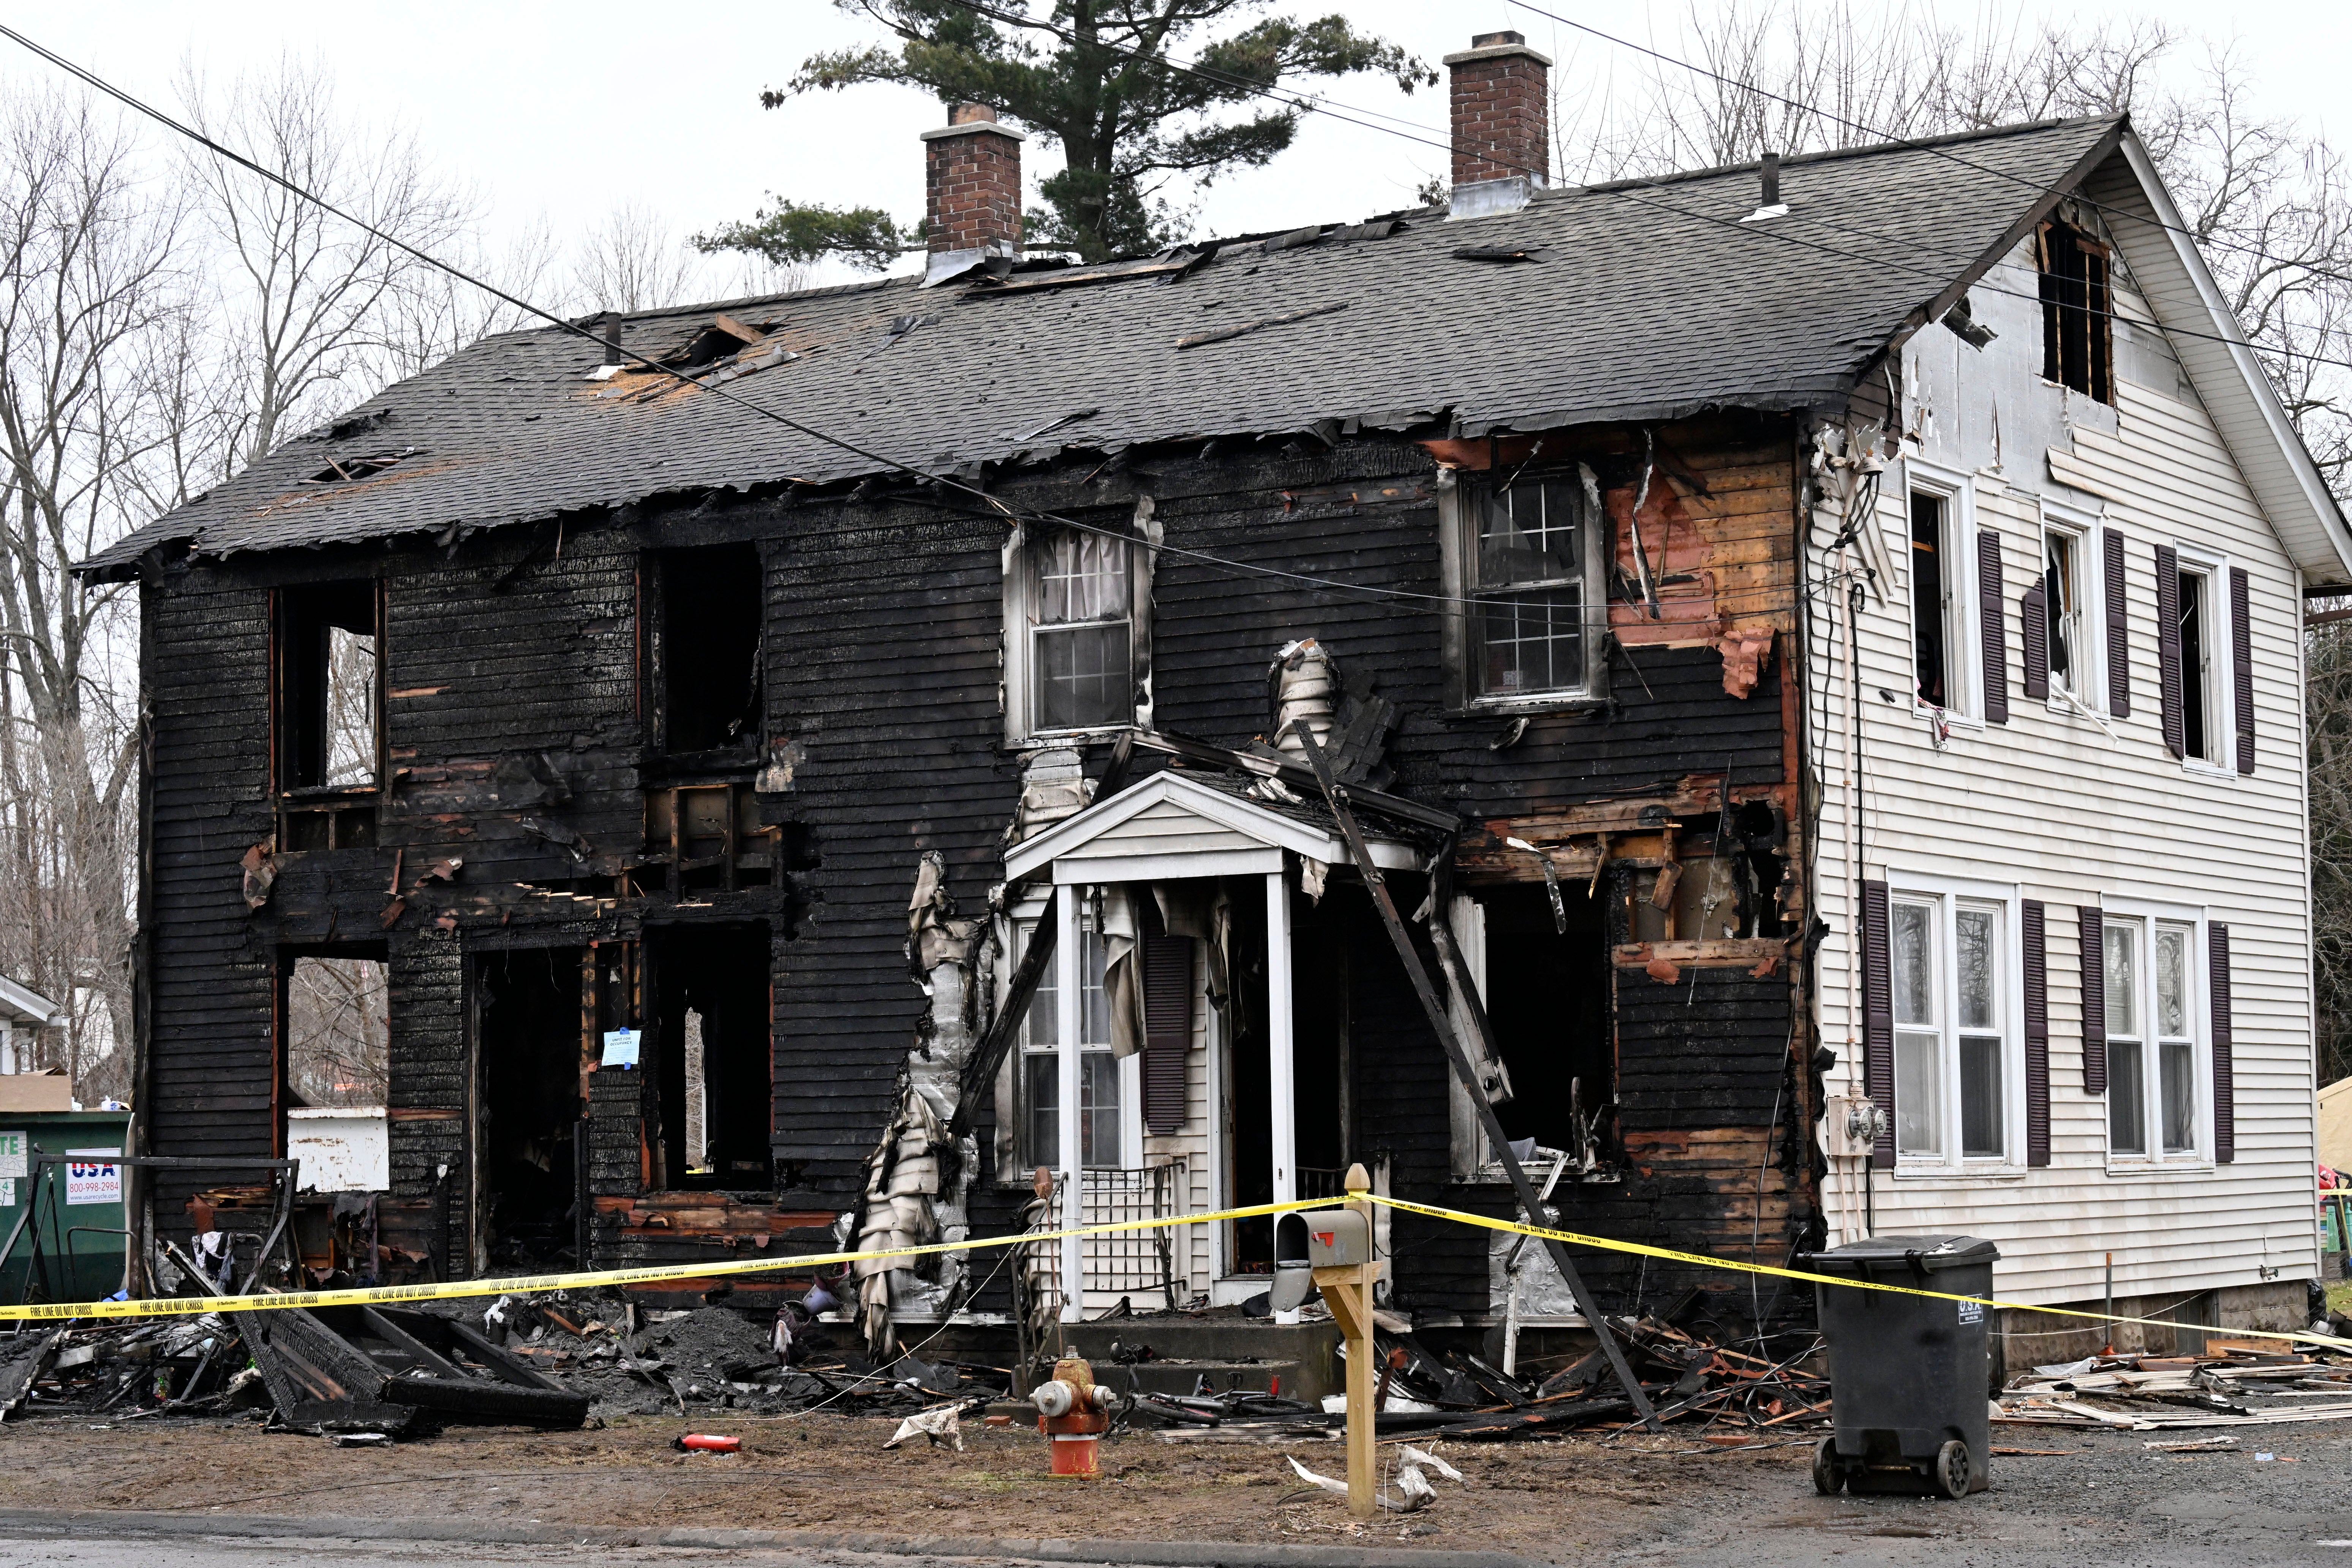 Four children died after a house fire broke out in the Somers, Connecticut duplex pictured above